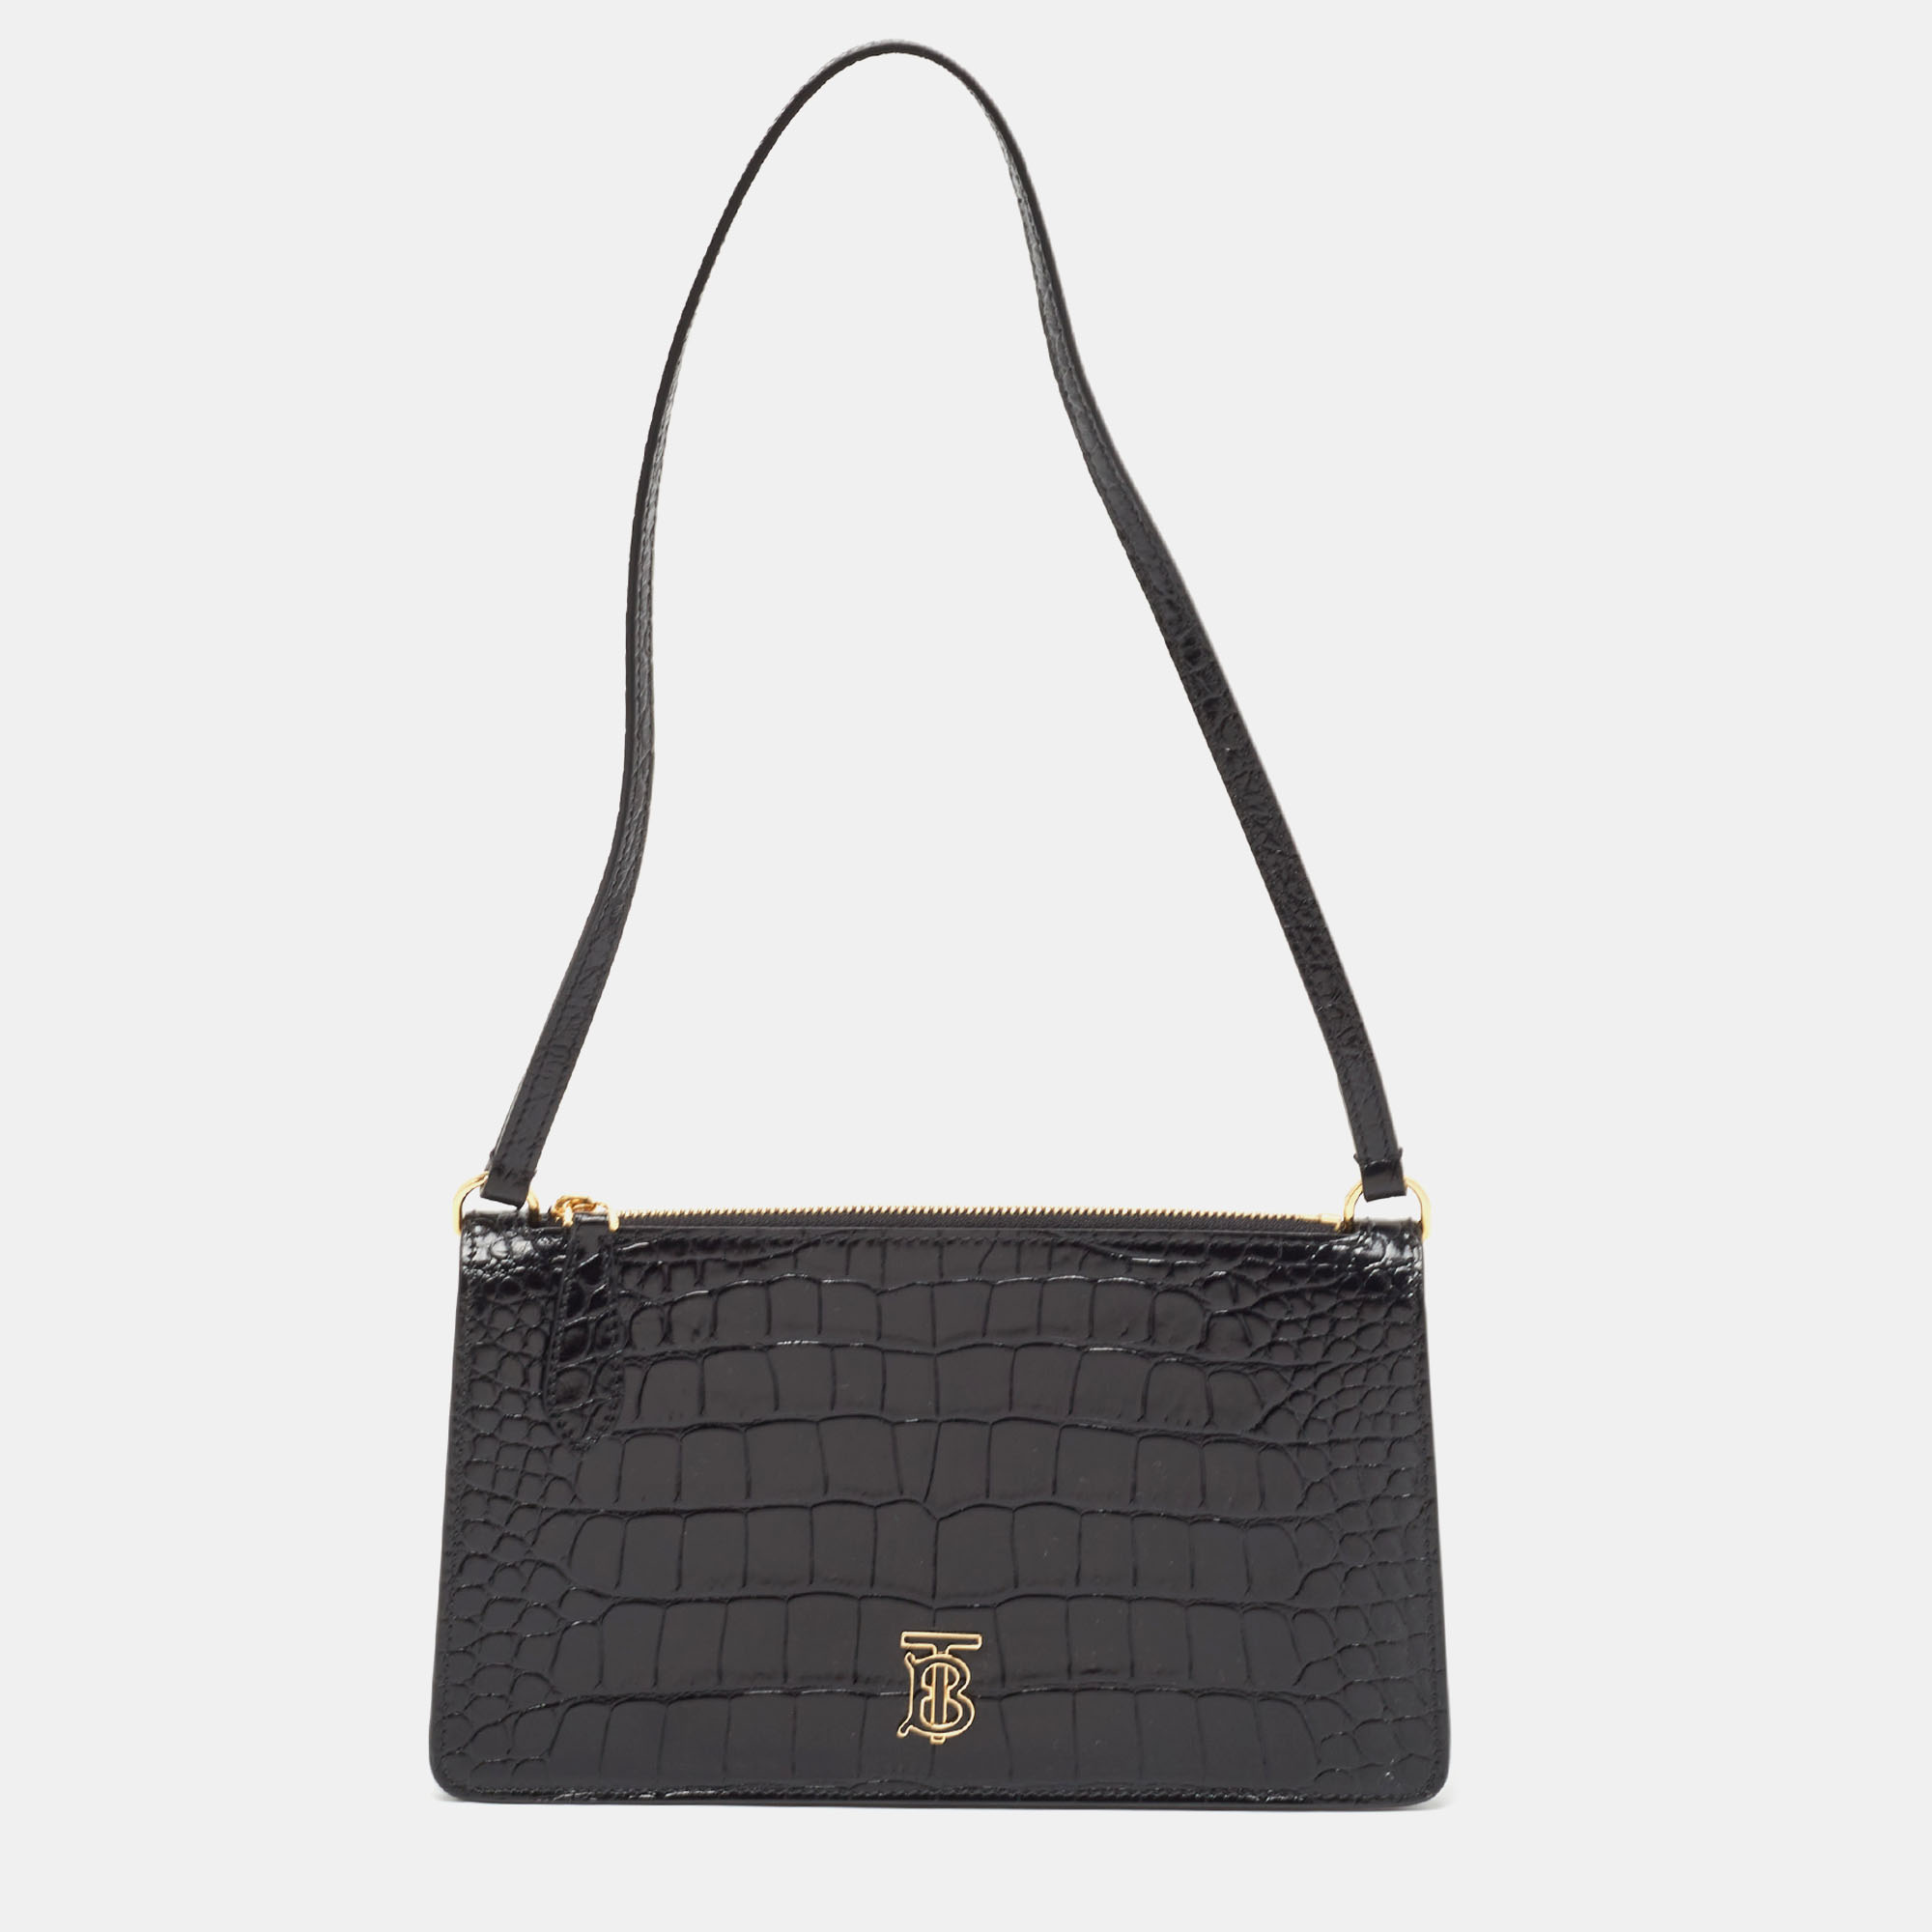 For a look that is complete with style taste and a touch of luxe this Burberry bag is the perfect addition. Flaunt this beauty on your shoulder at any event and revel in the taste of luxury it leaves you with.